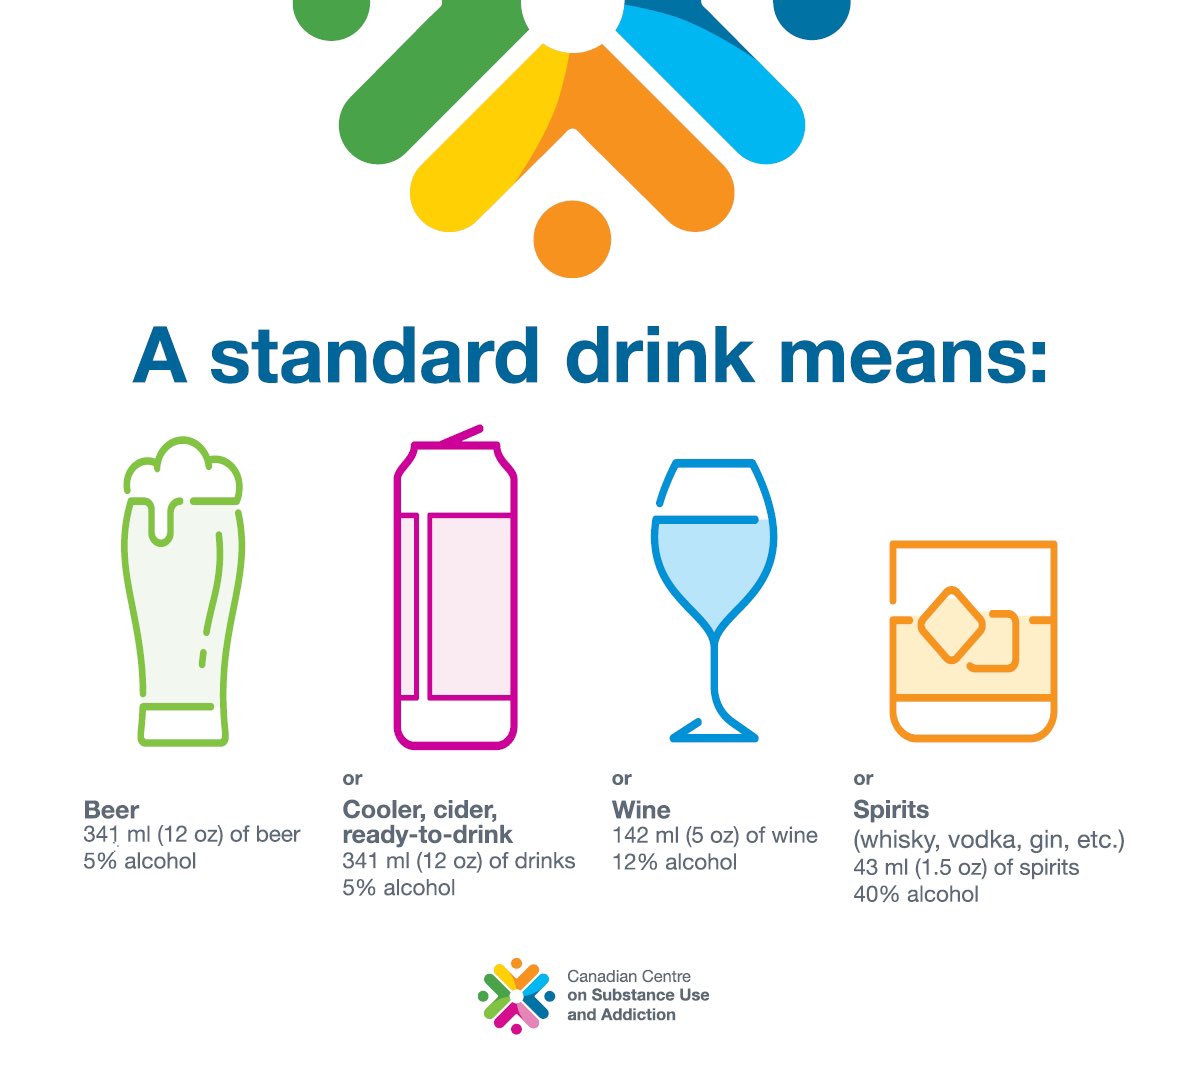 With dry January and February among us, it’s a good time to remind ourselves and our patients of the new Canadian Alcohol Guidelines. #DrinkLessLiveMore